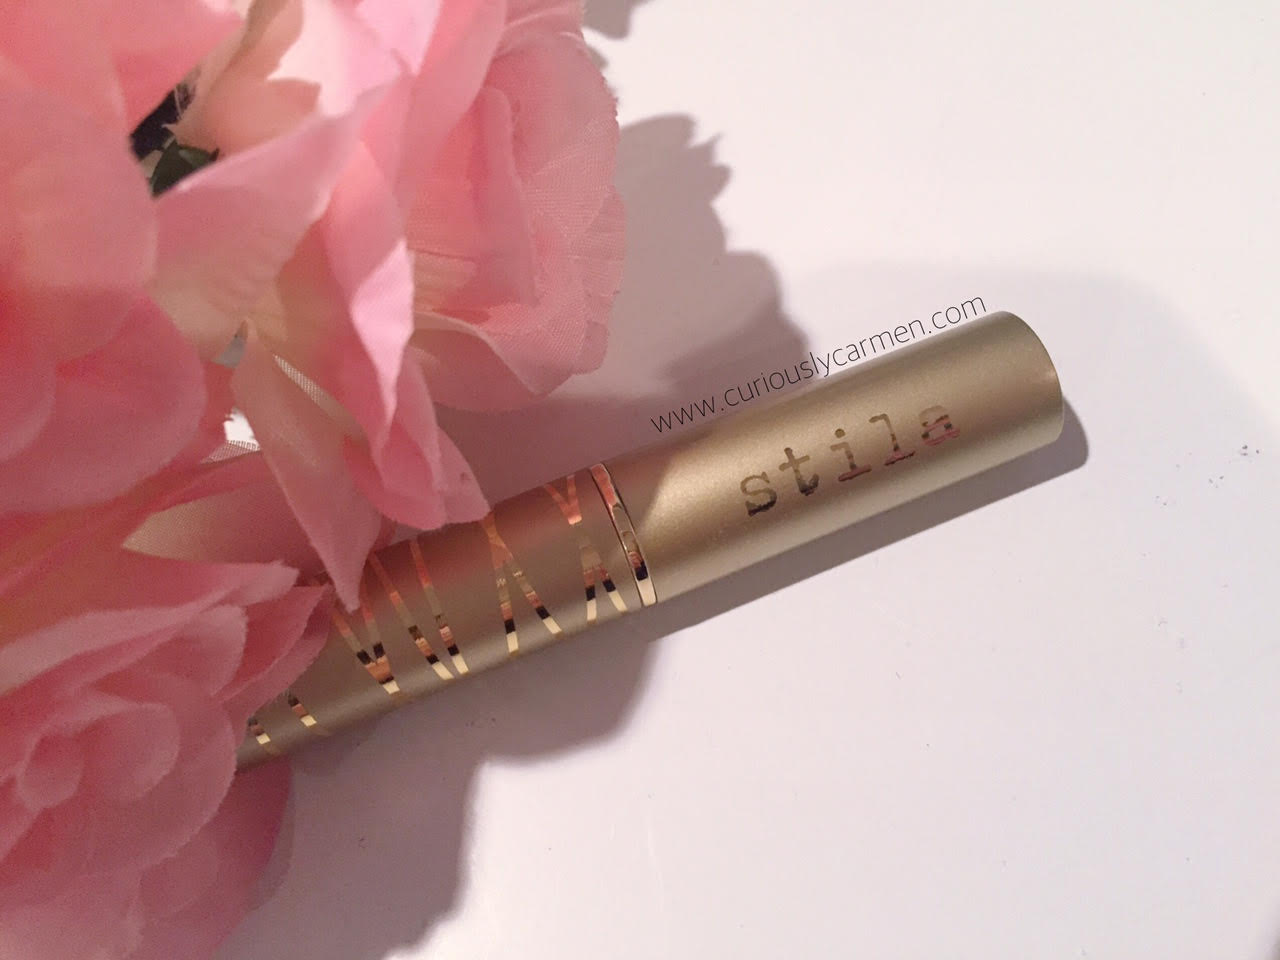 stila-stay-all-day-matteficient-mon-ami